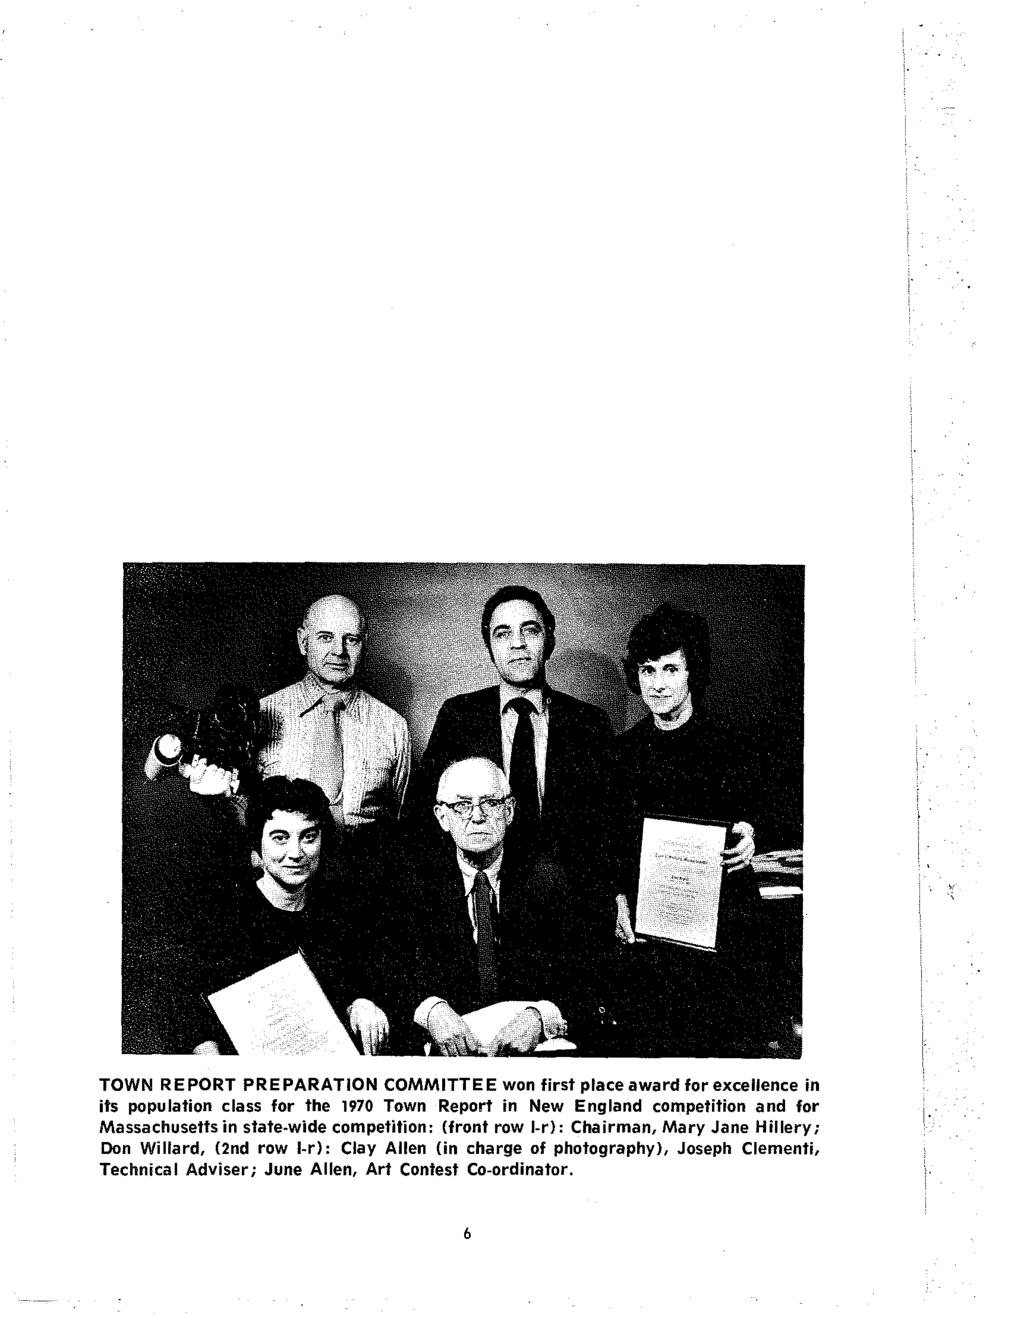 TOWN REPORT PREPARATION COMMITTEE won first place award for excellence in its population class for the 1970 Town Report in New England competition and for Massachusetts in state-wide